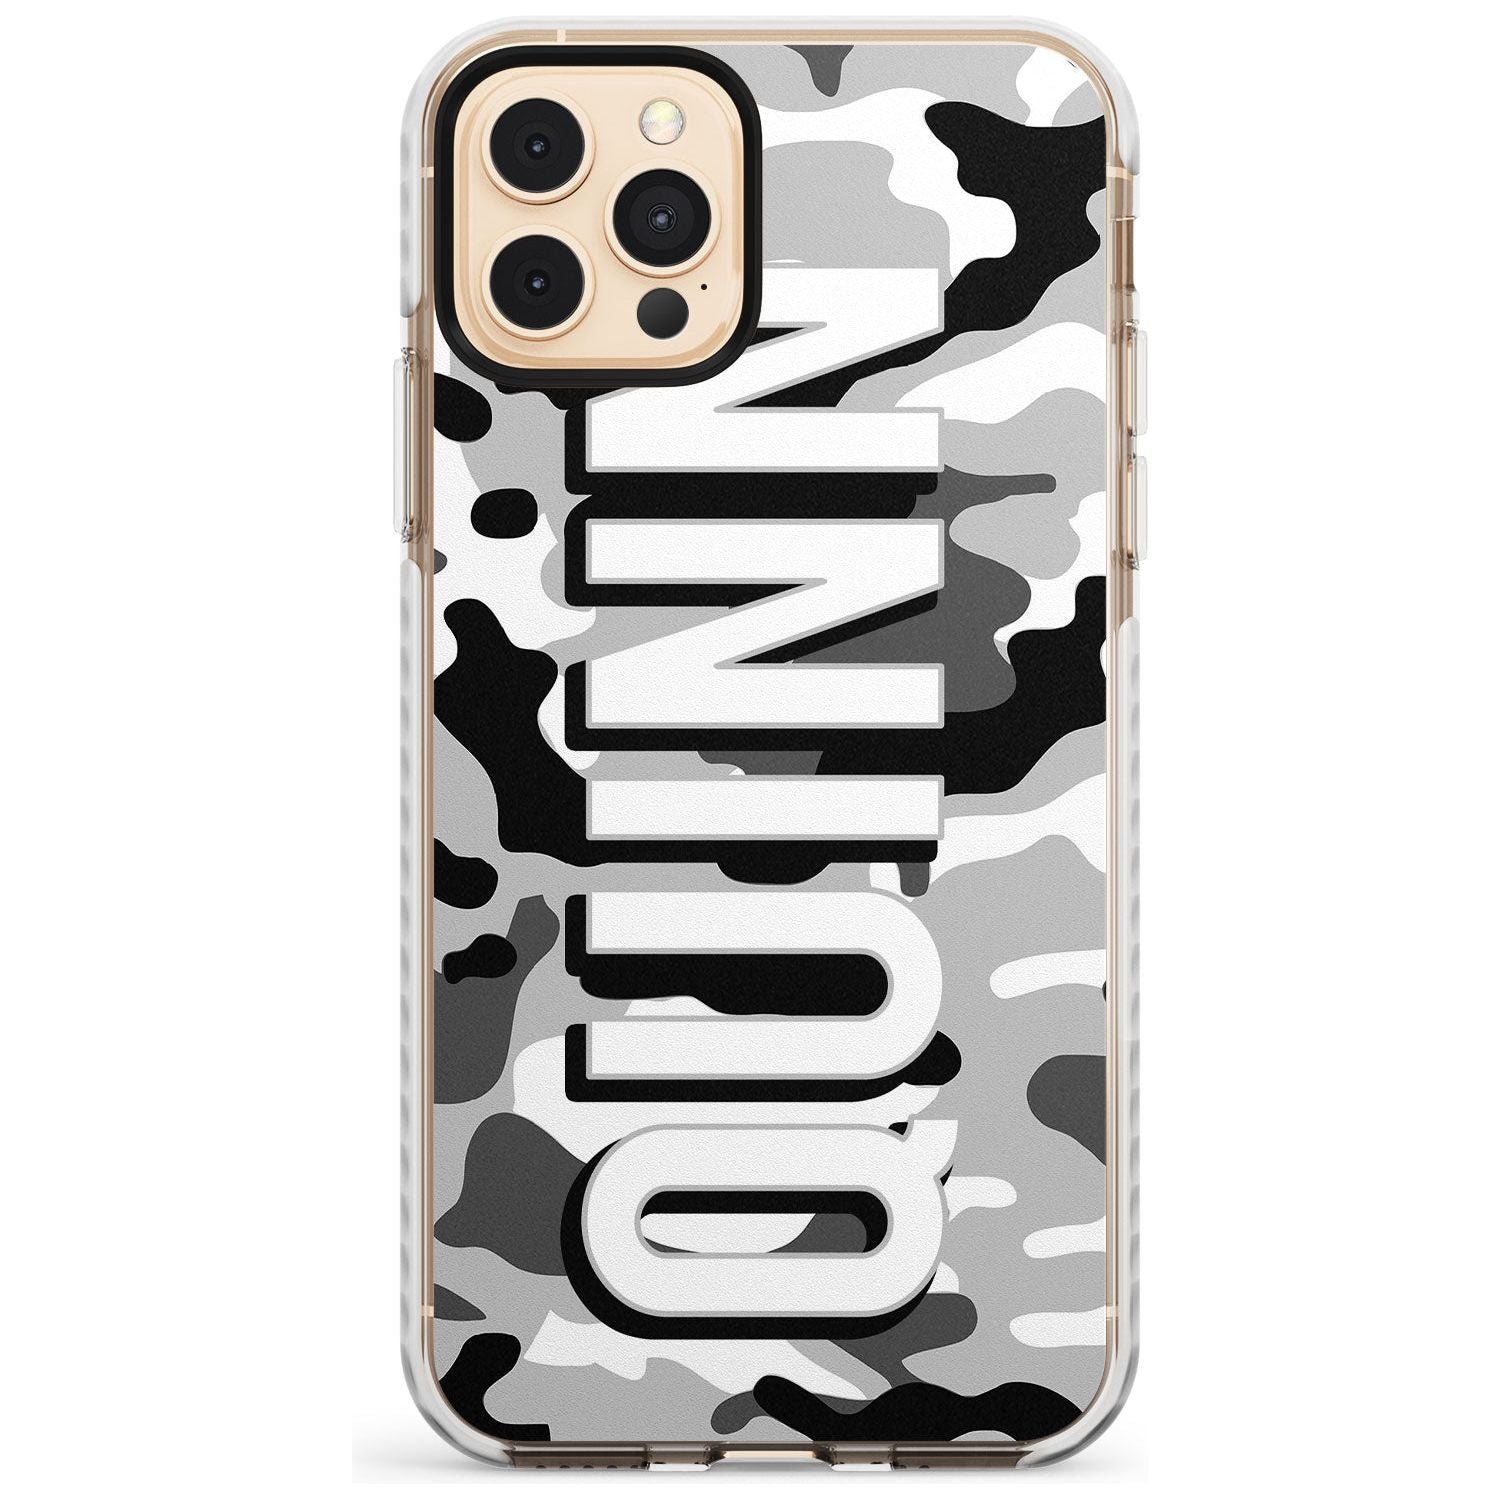 Greyscale Camo Slim TPU Phone Case for iPhone 11 Pro Max